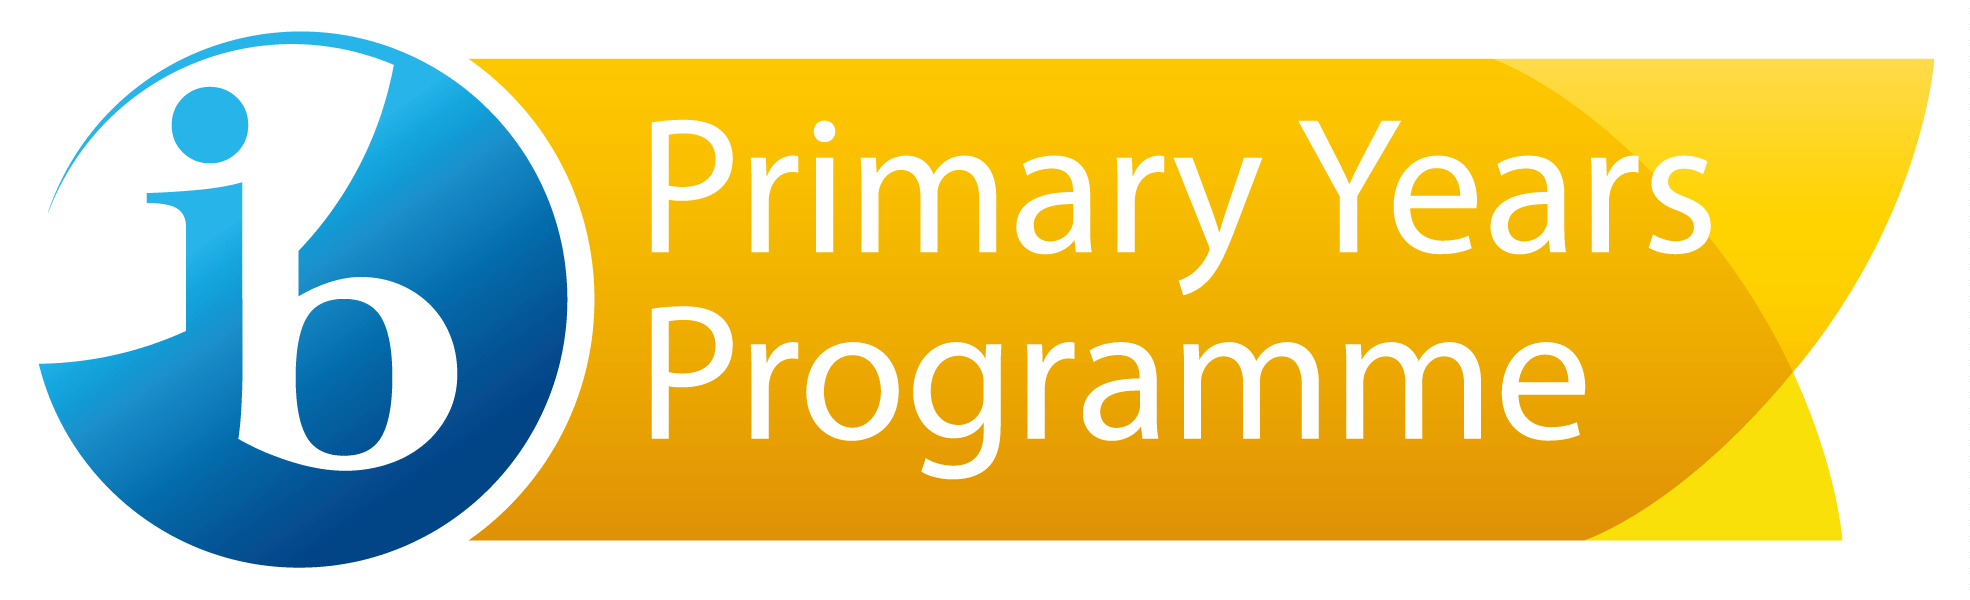 IB Primary Years Programme logo and link